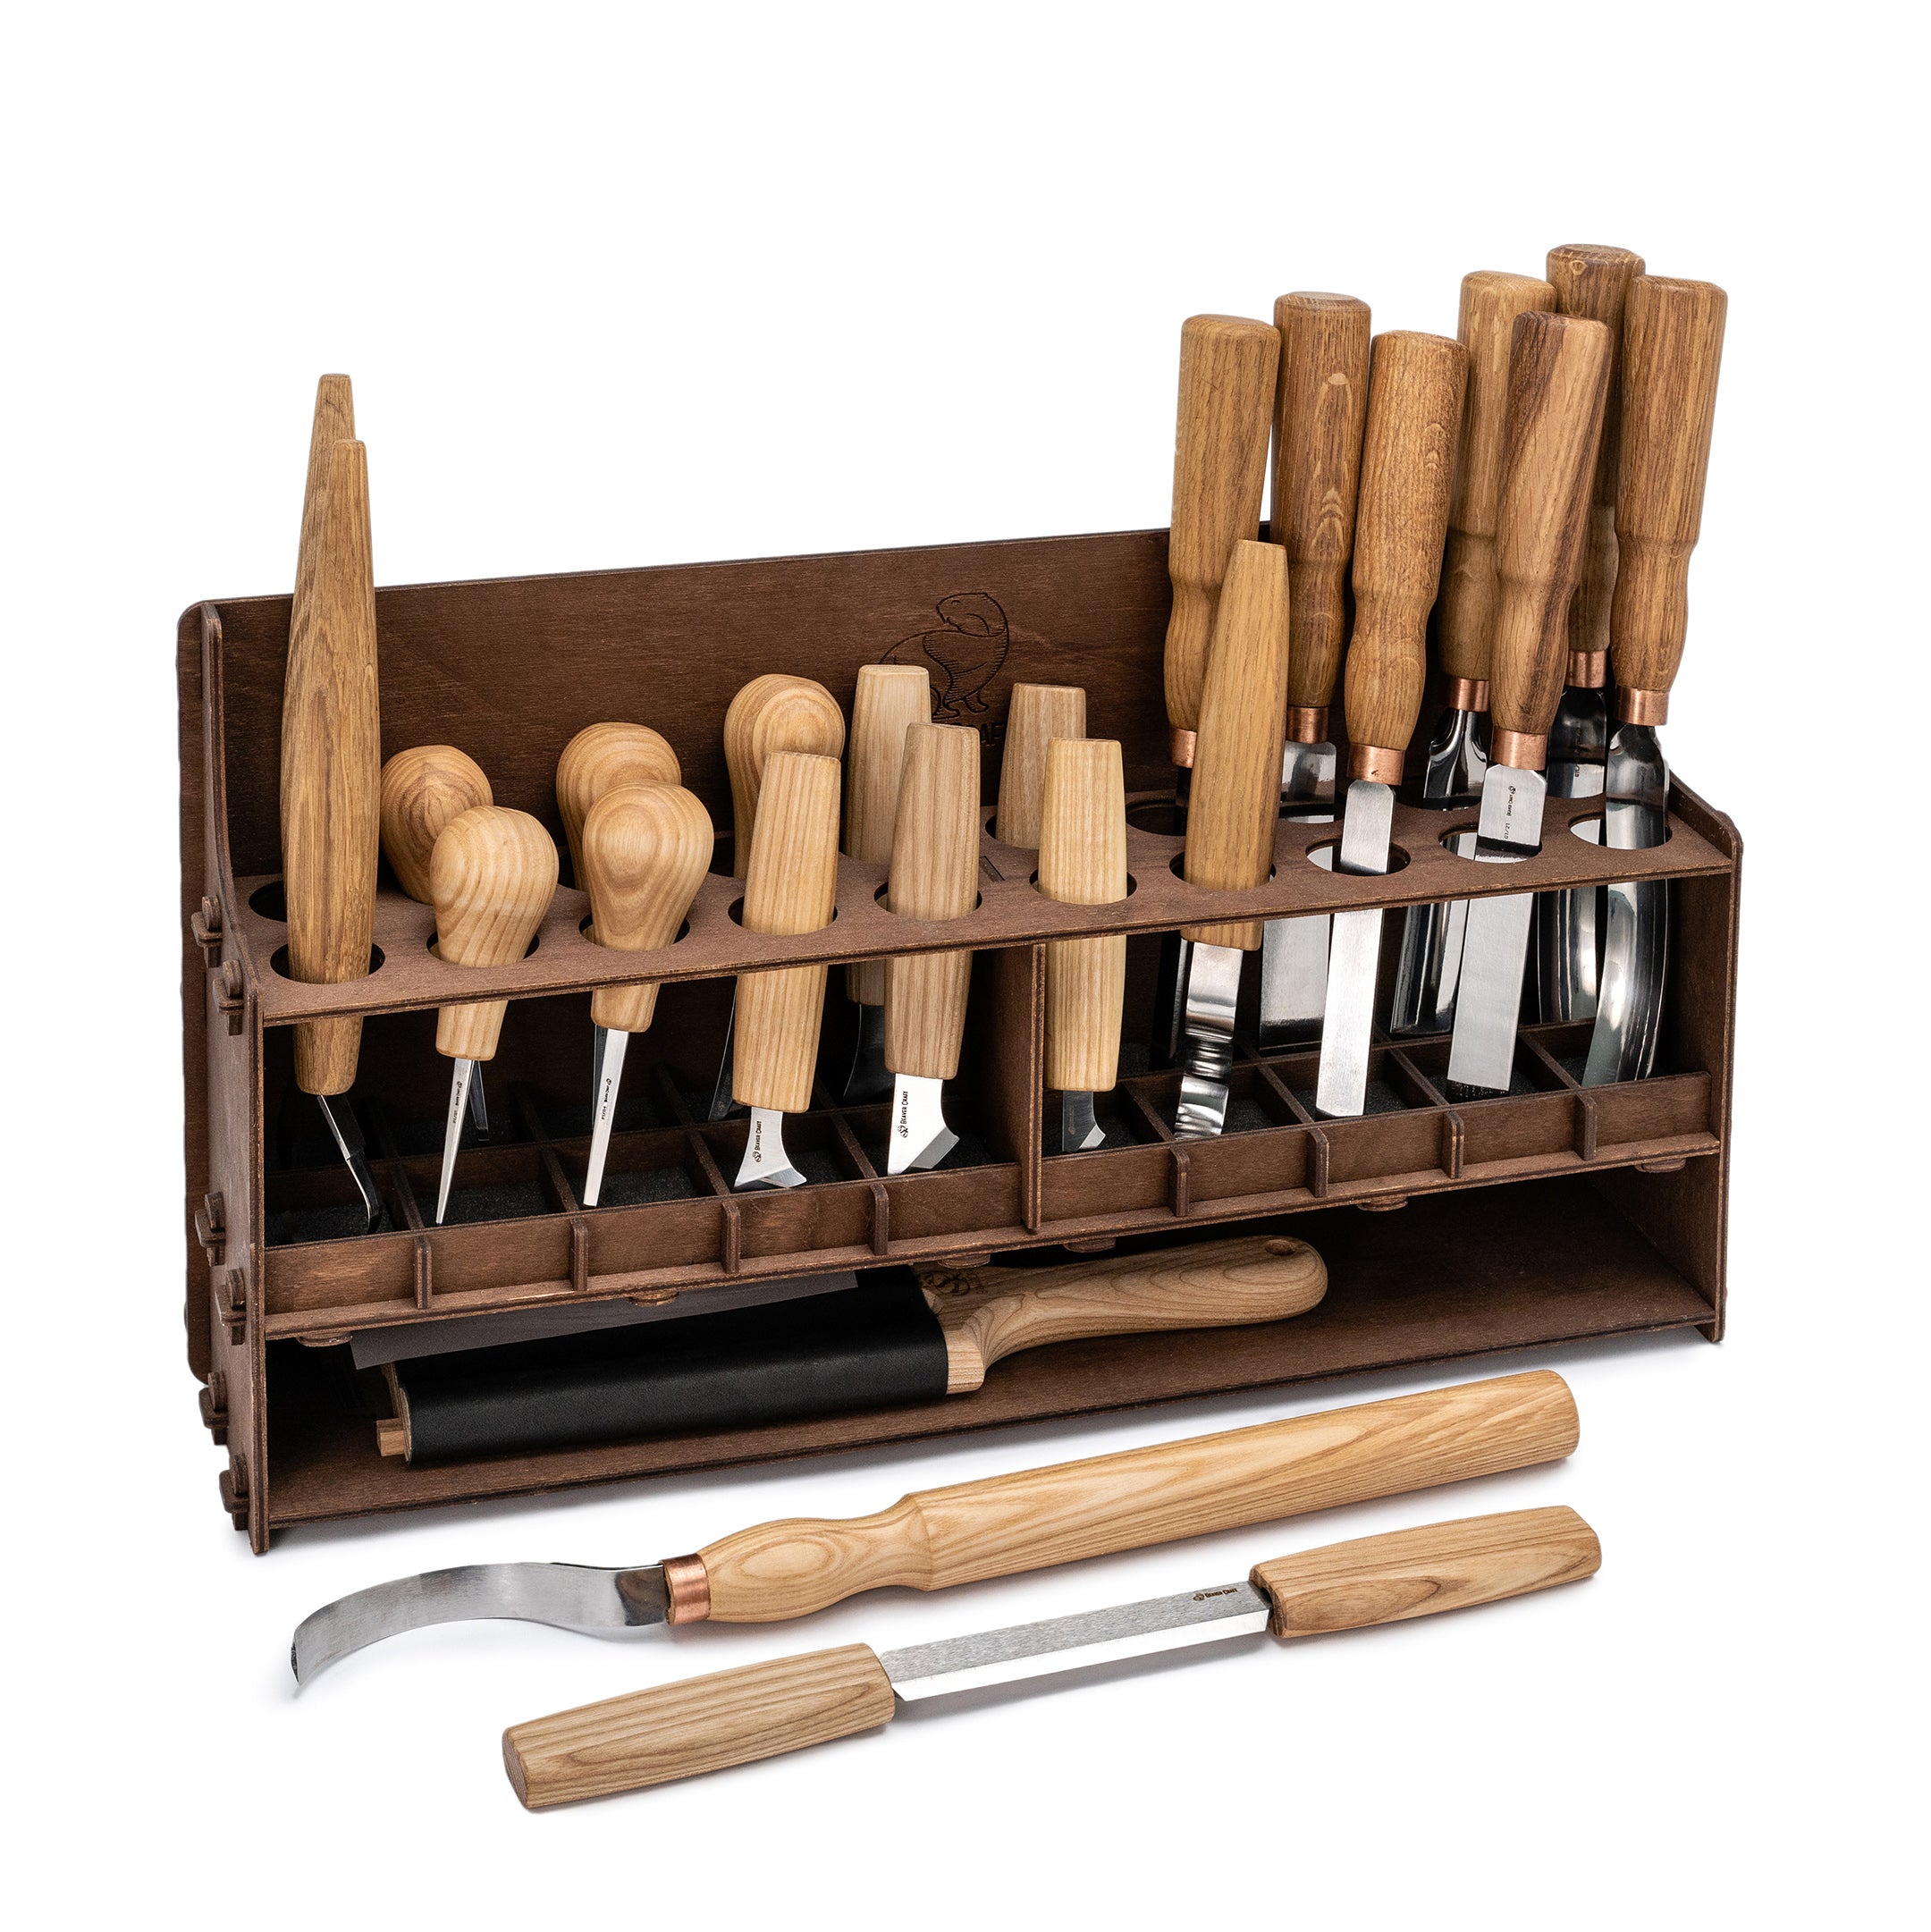 Professional Wood Carving Tools: Beginners Roughing Bench Carving